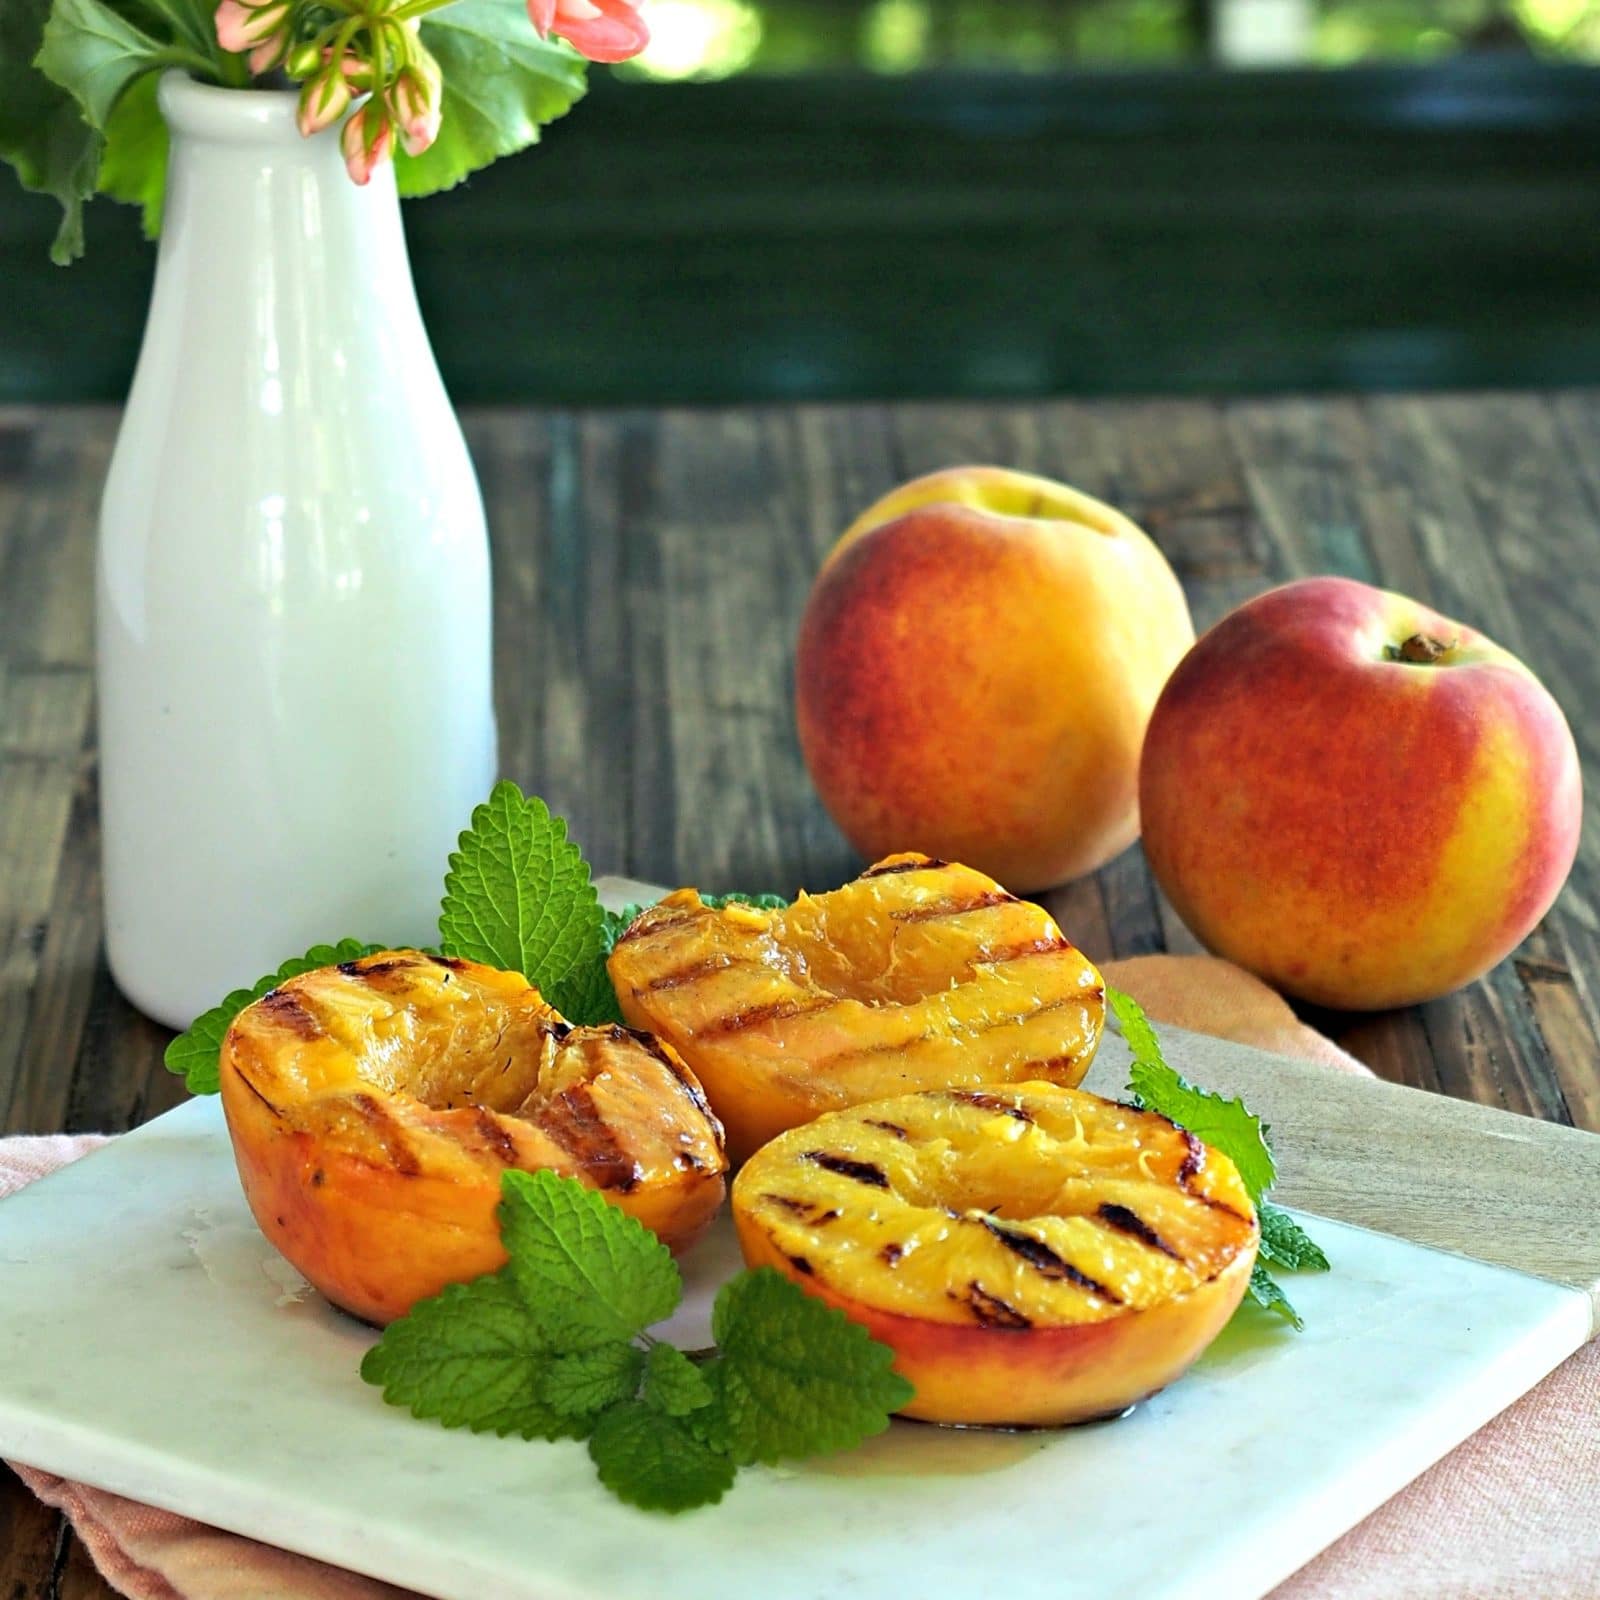 Peachy-Keen Grilled Peaches - Simply Sated